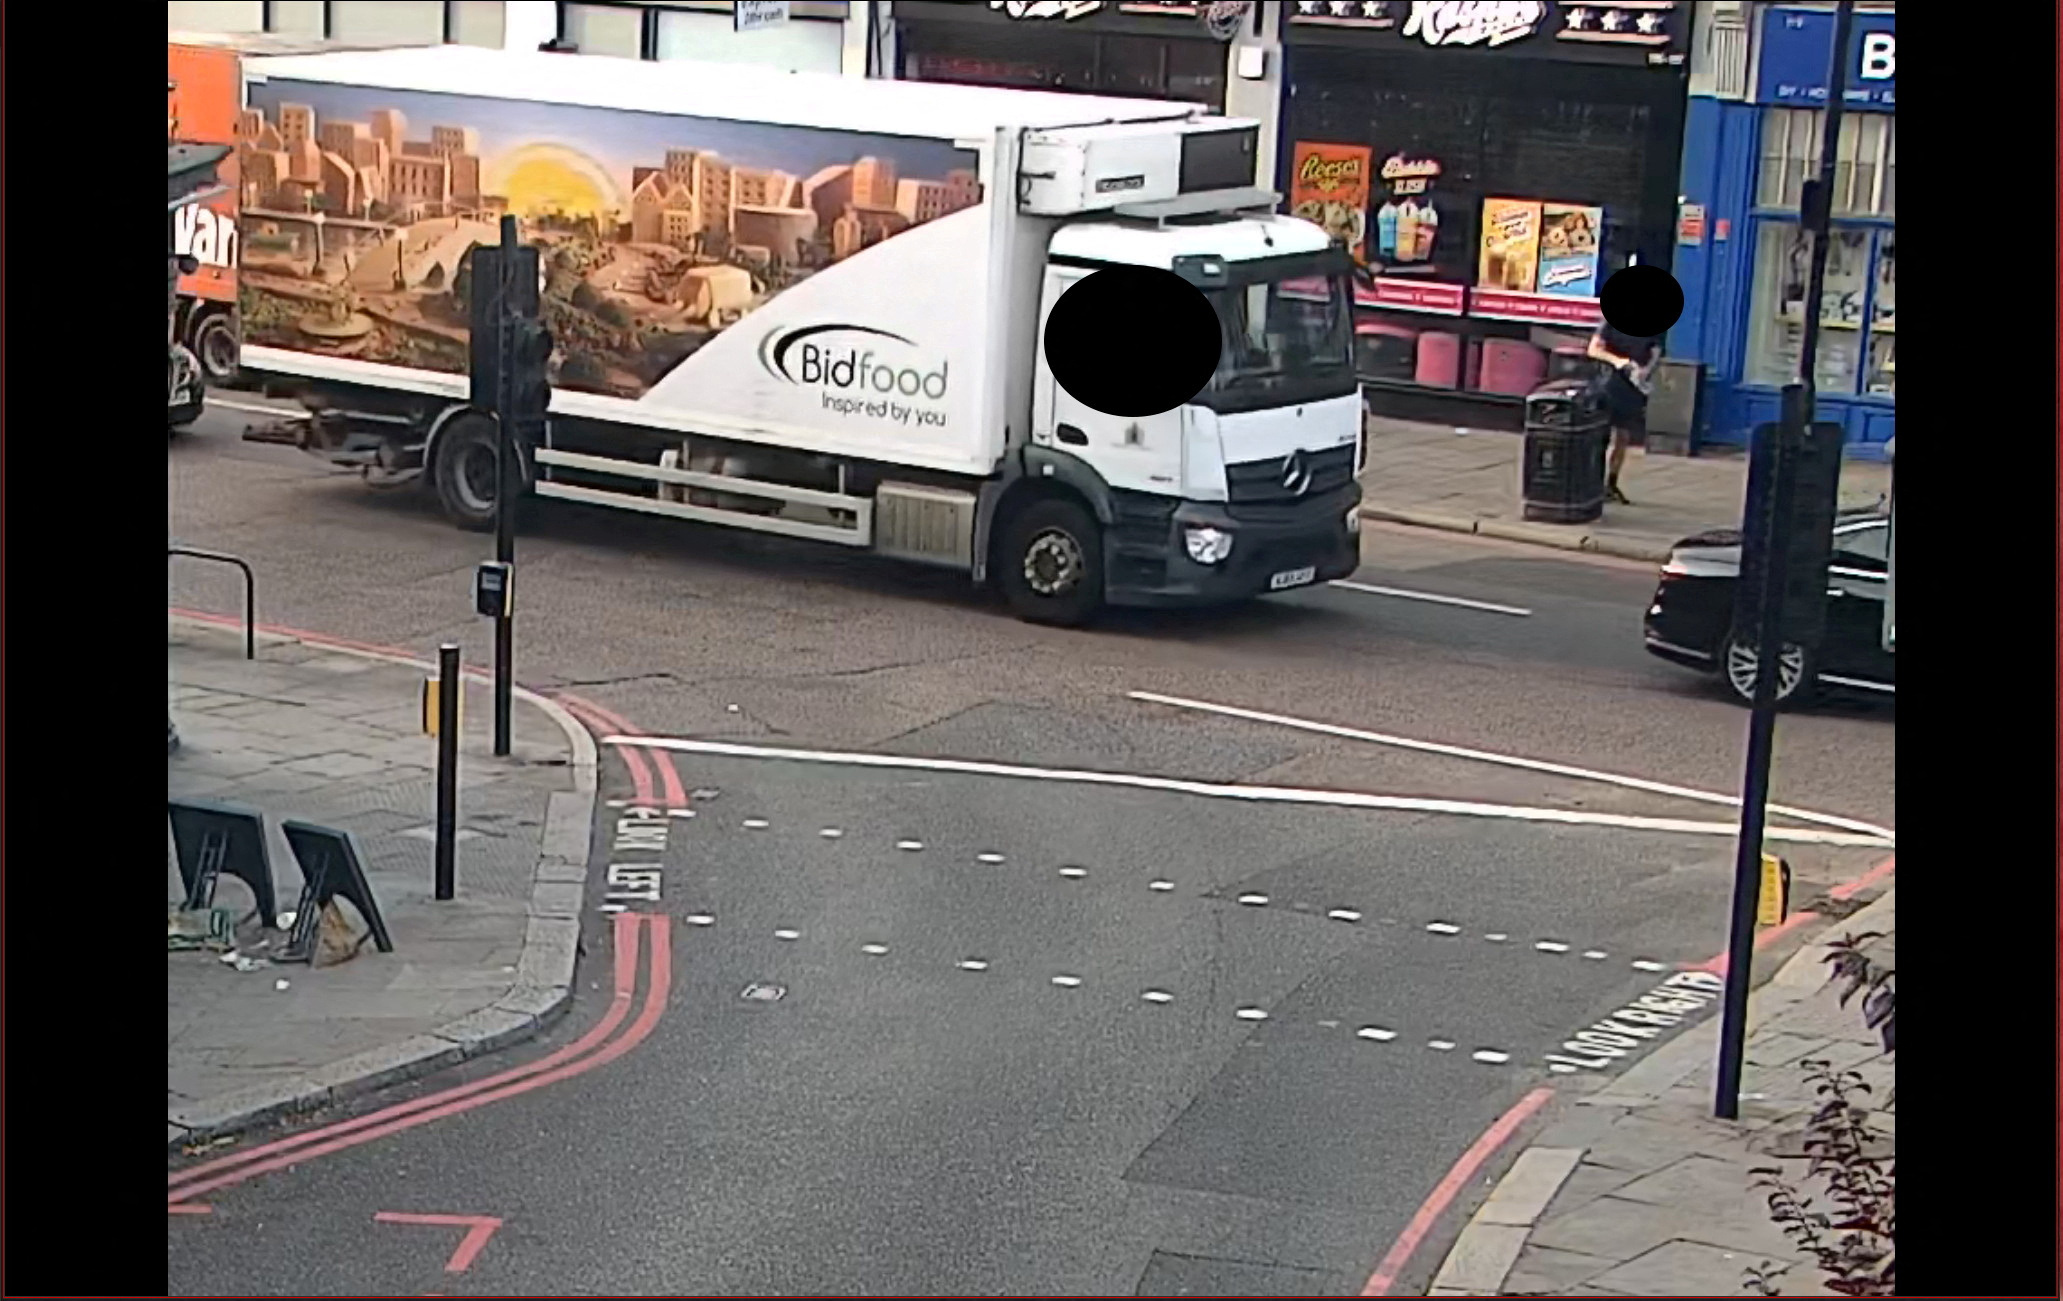 A CCTV image shows the lorry investigators believe was used in the escape of a soldier suspected of terrorism offences, in London